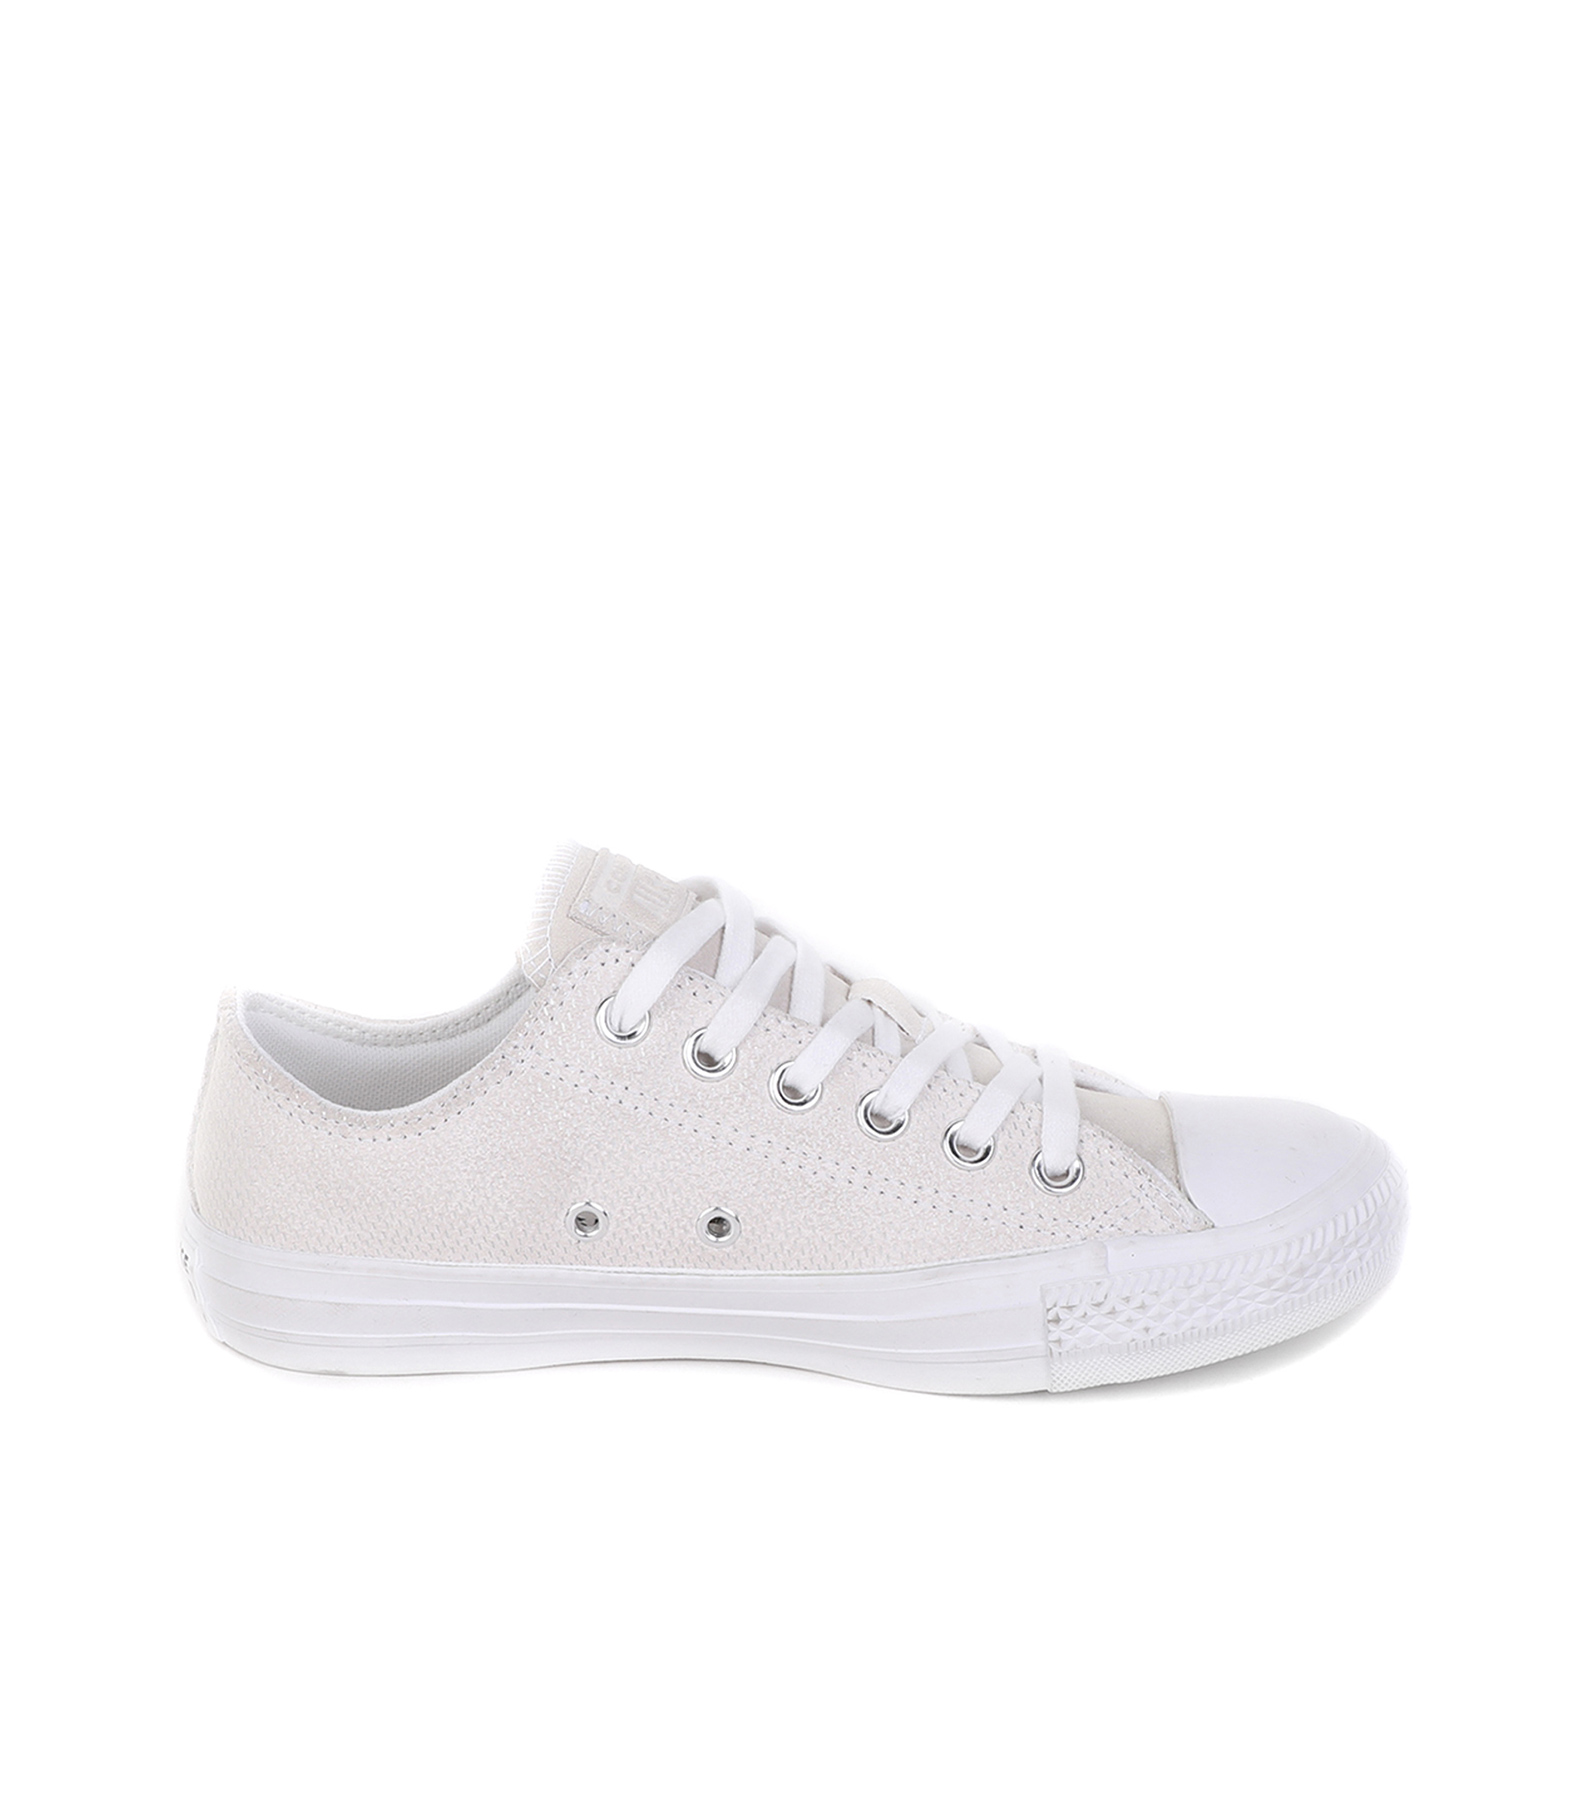 Converse Tenis Casuales Mujer